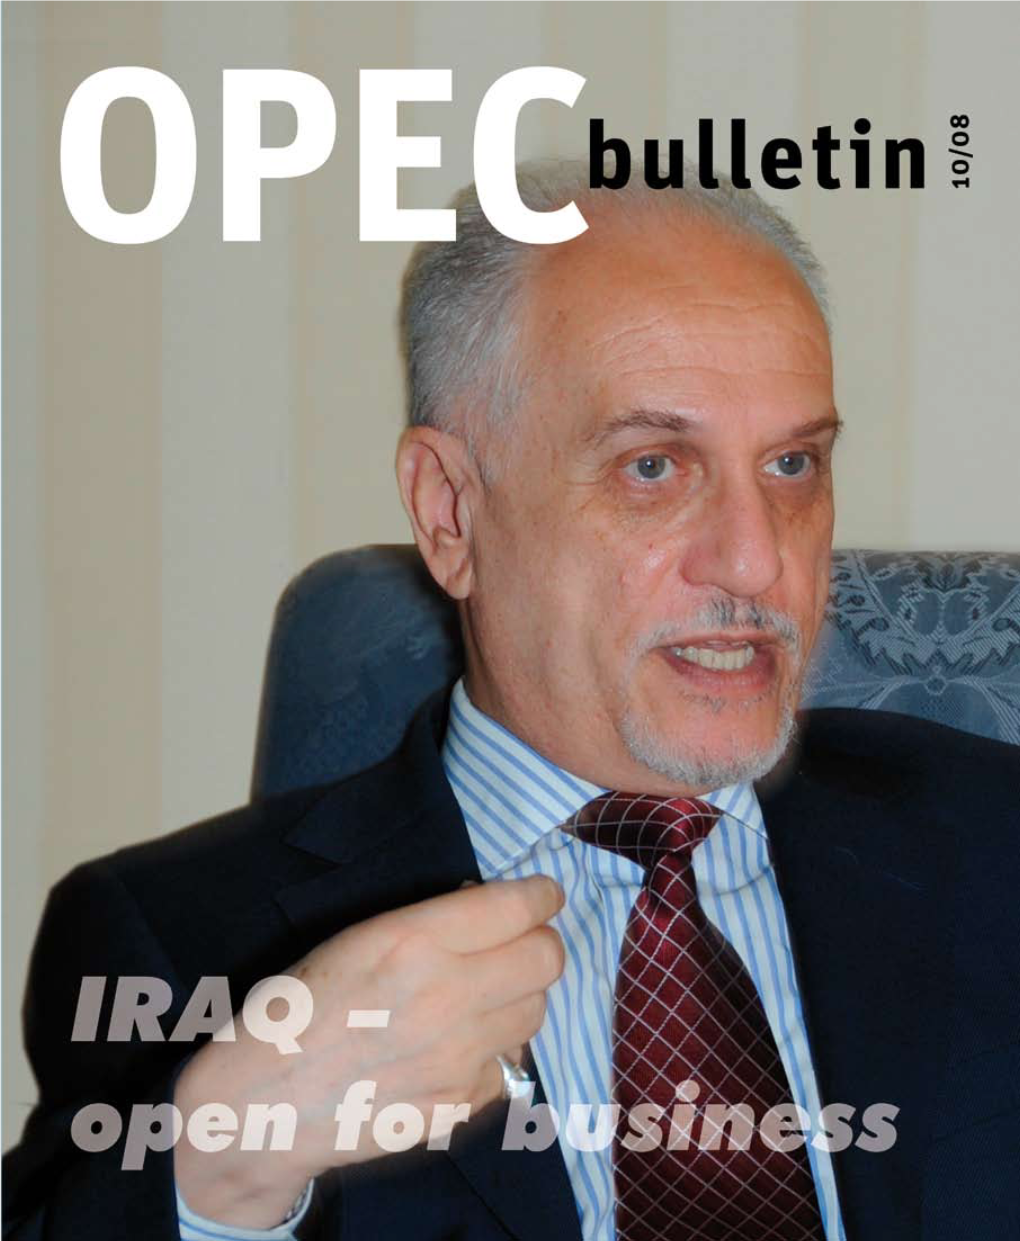 October Edition of the OPEC Bulletin